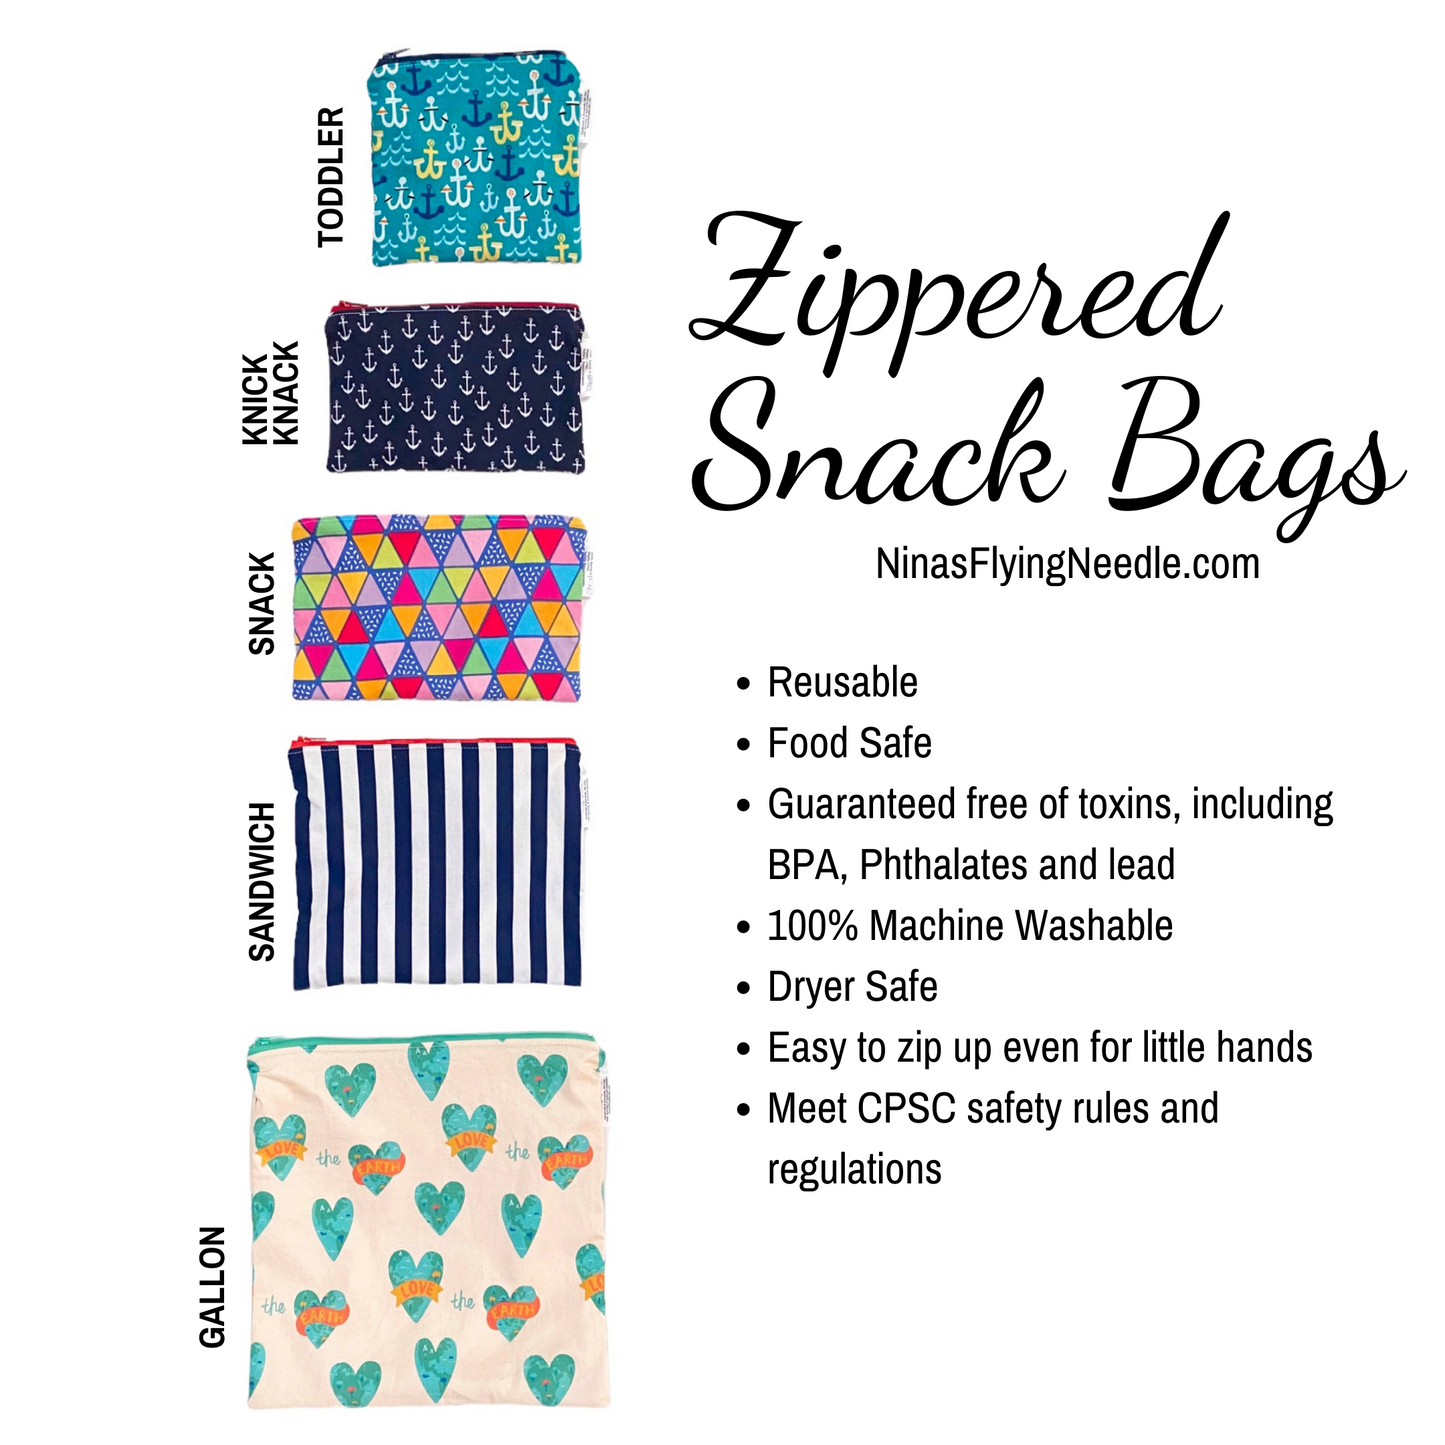 Toddler Sized Reusable Zippered Bag Building Bricks Primary